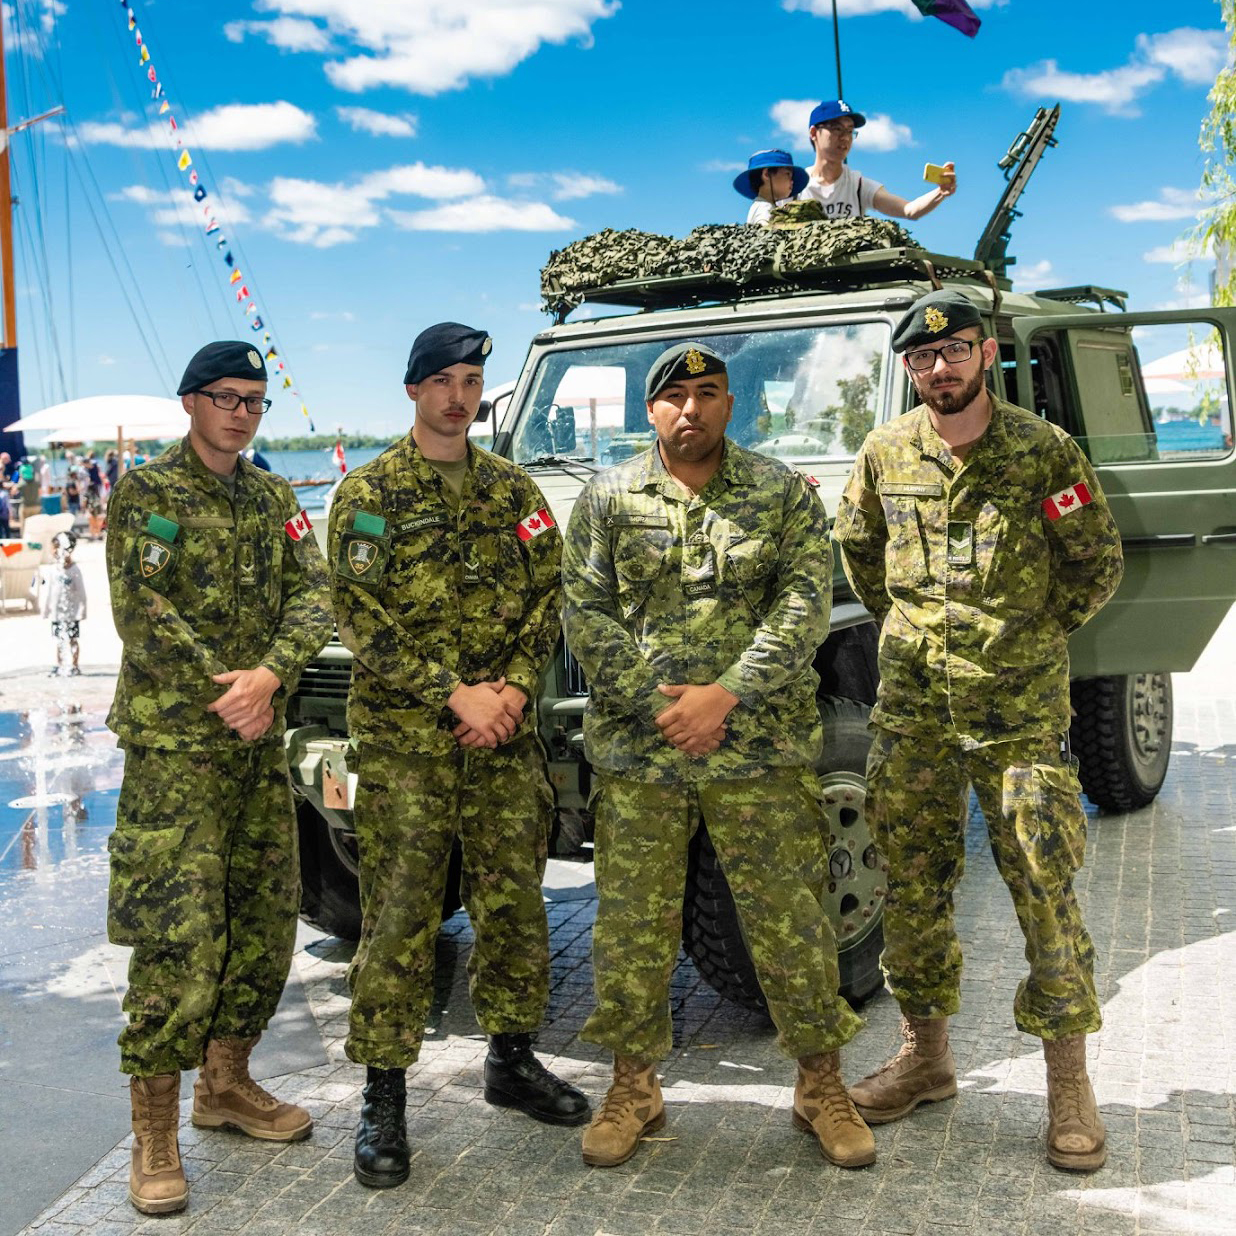 Canadian Armed Forces At The Waterfront Festival